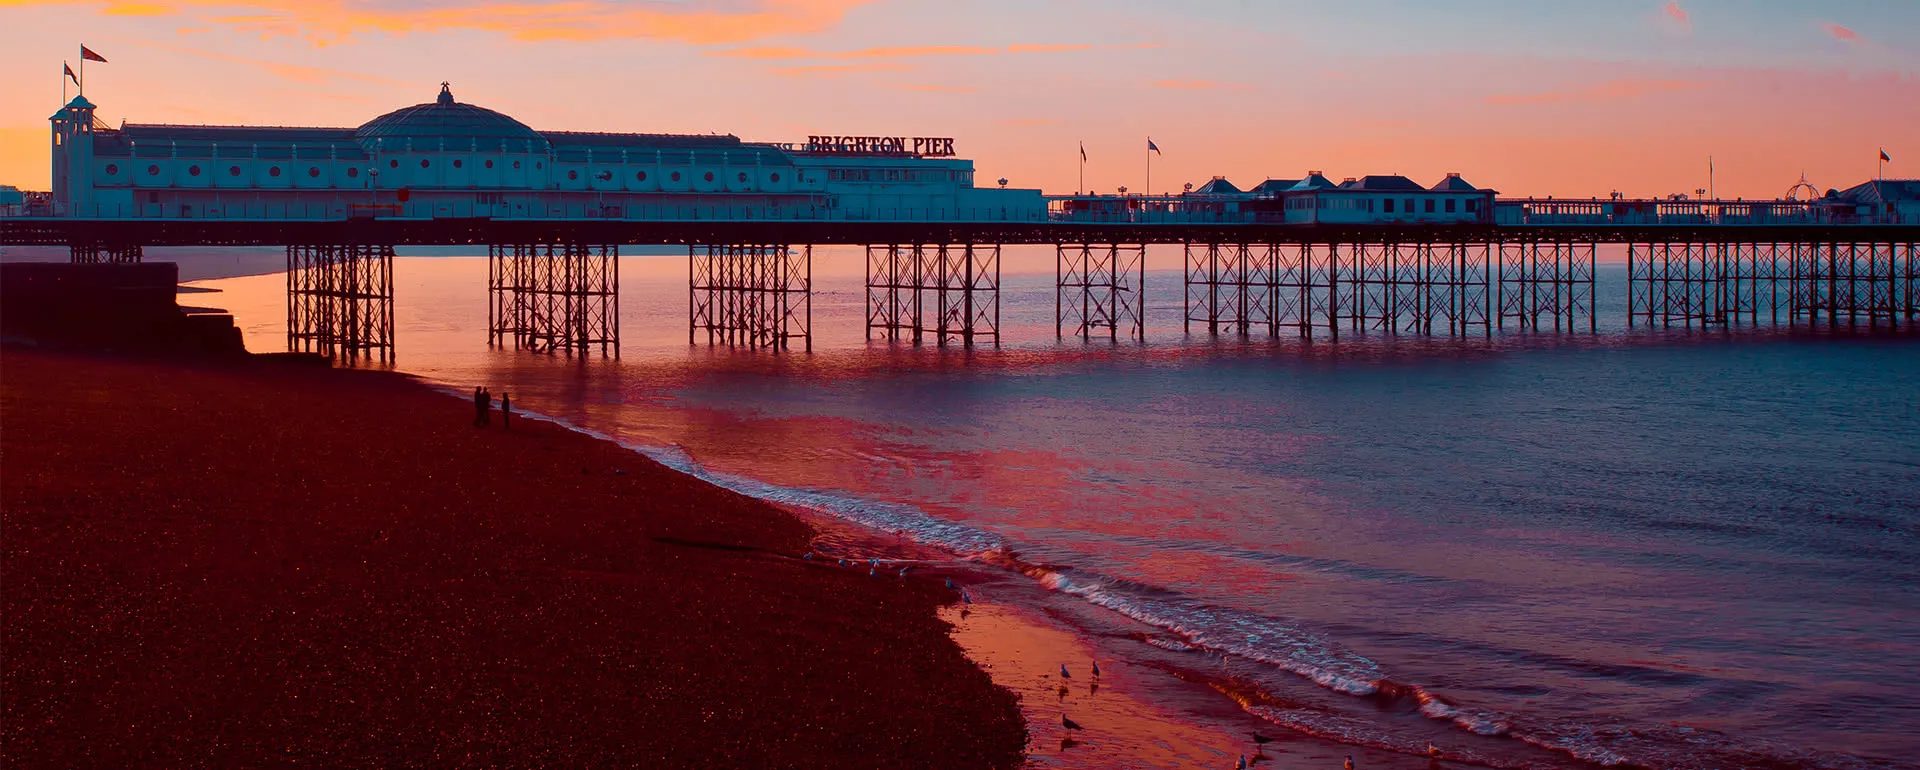 Brighton - the destination with youth hostels